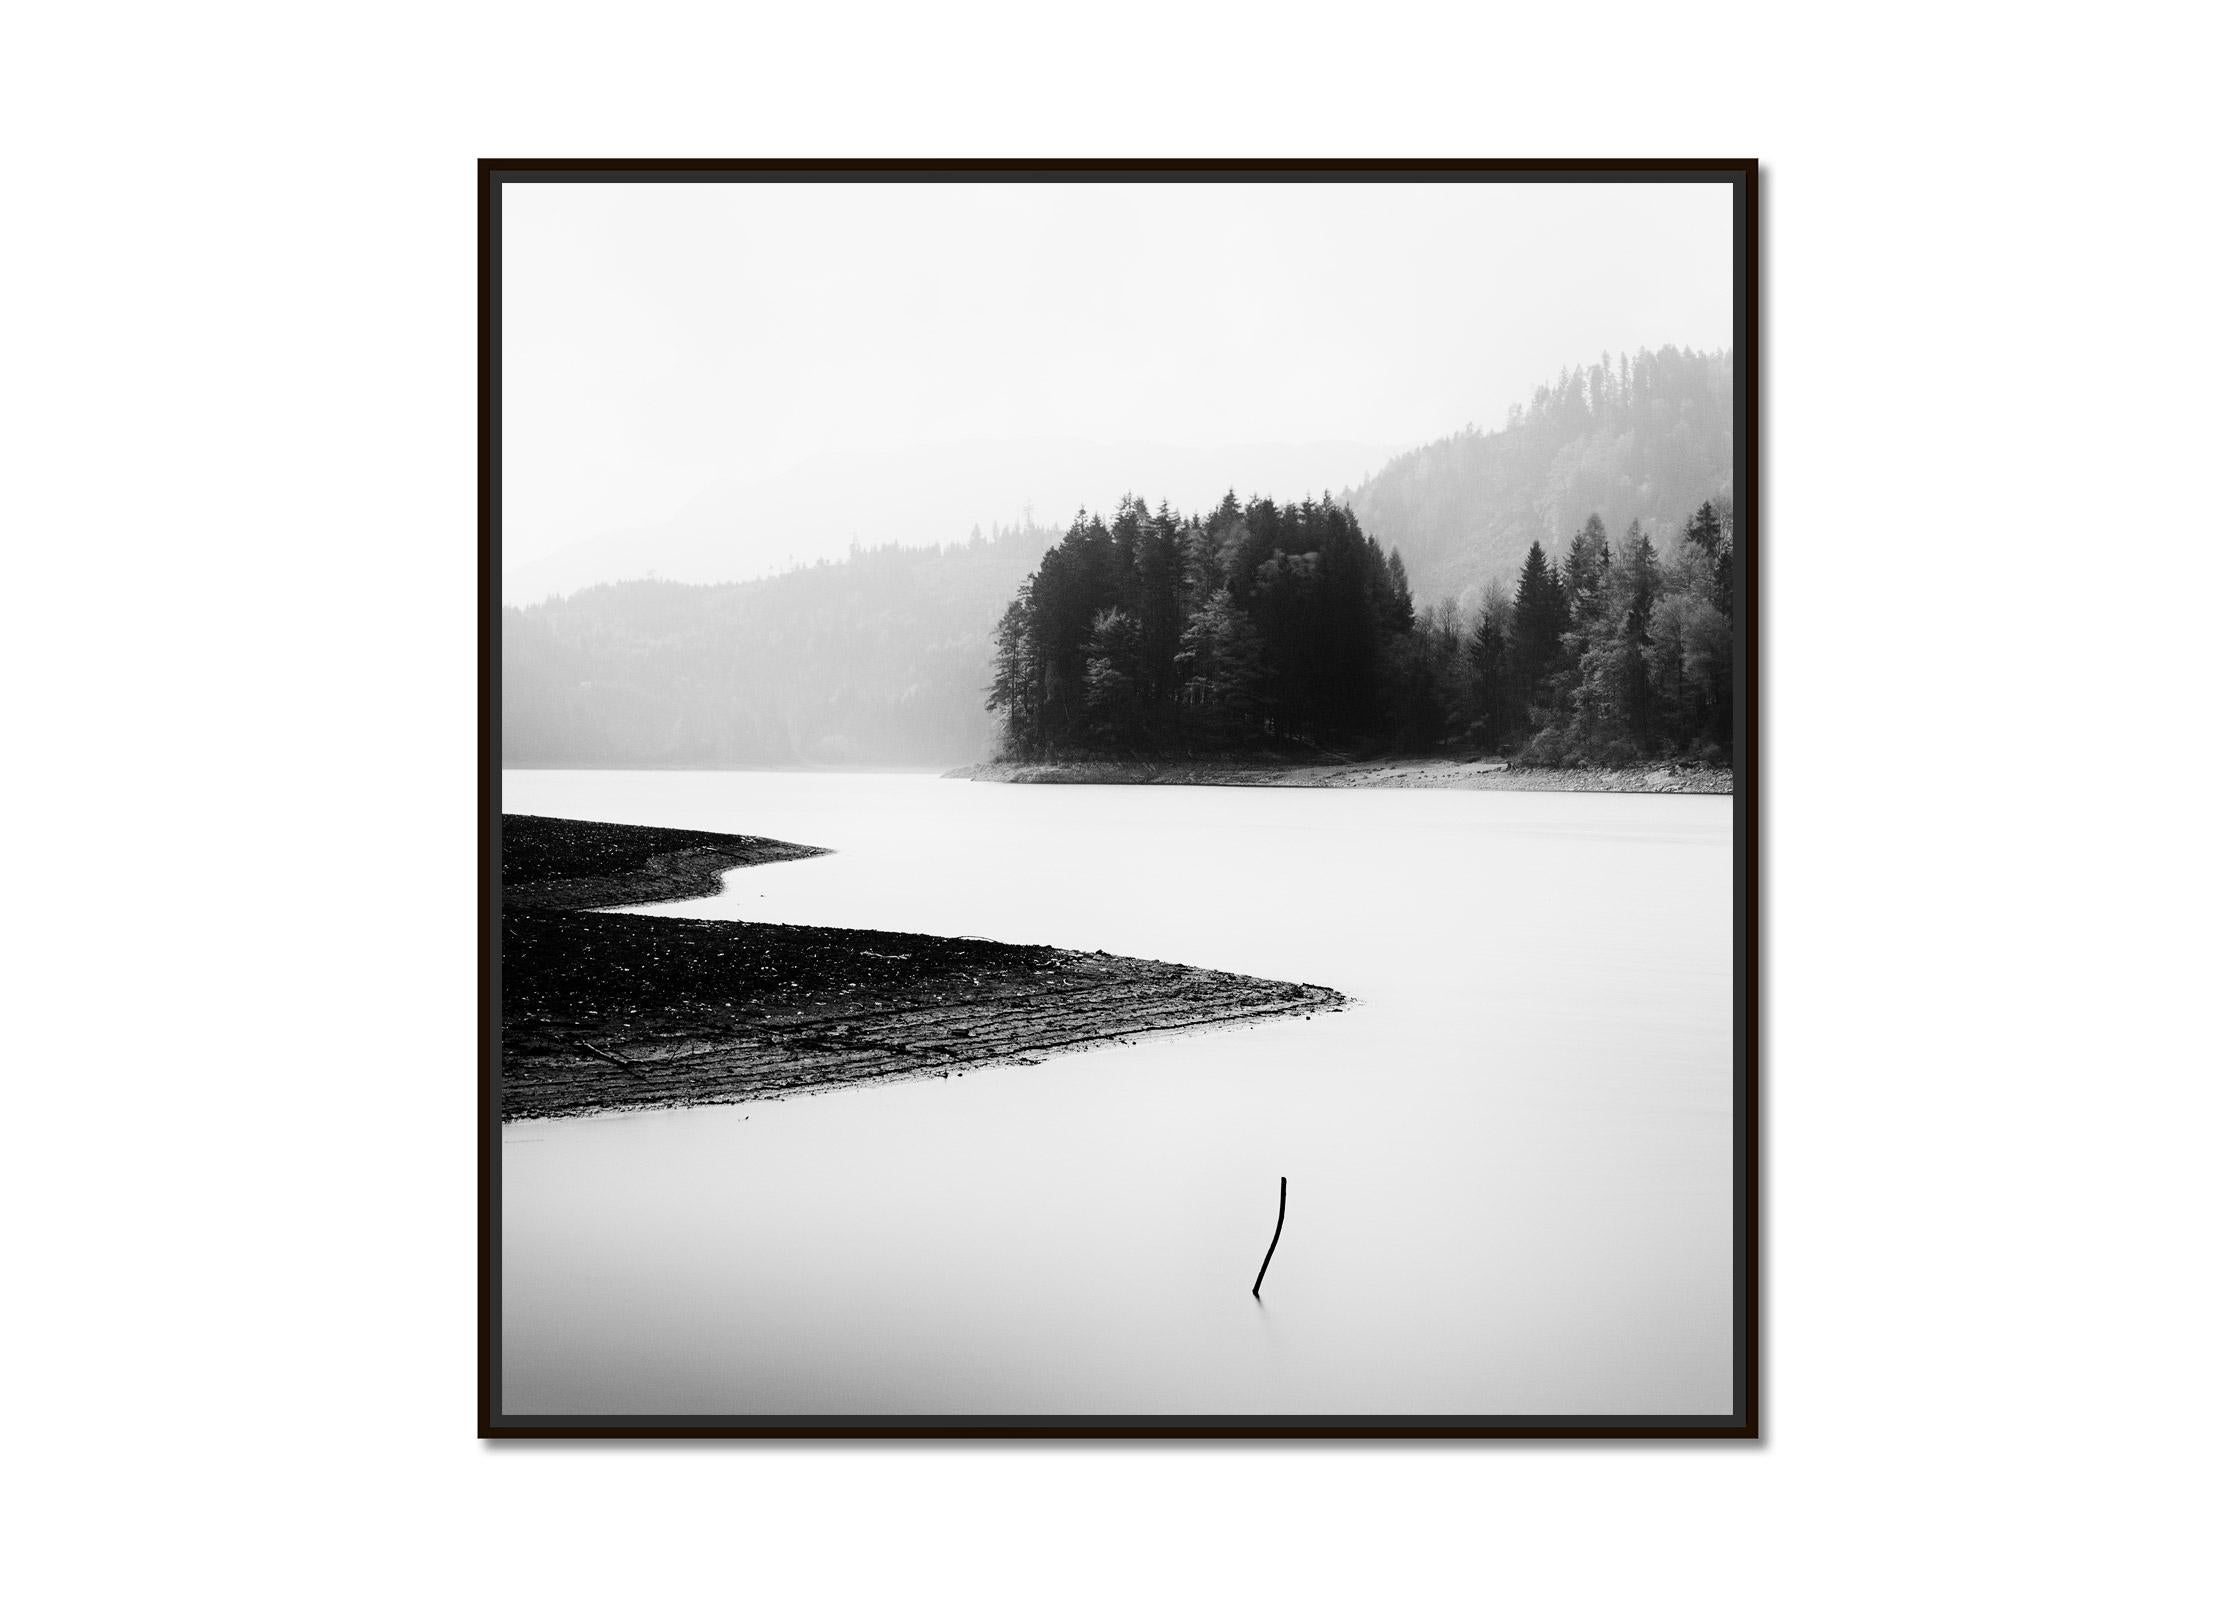 Minutes of Silence, mountain lake, black and white photography, art, landscape - Photograph by Gerald Berghammer